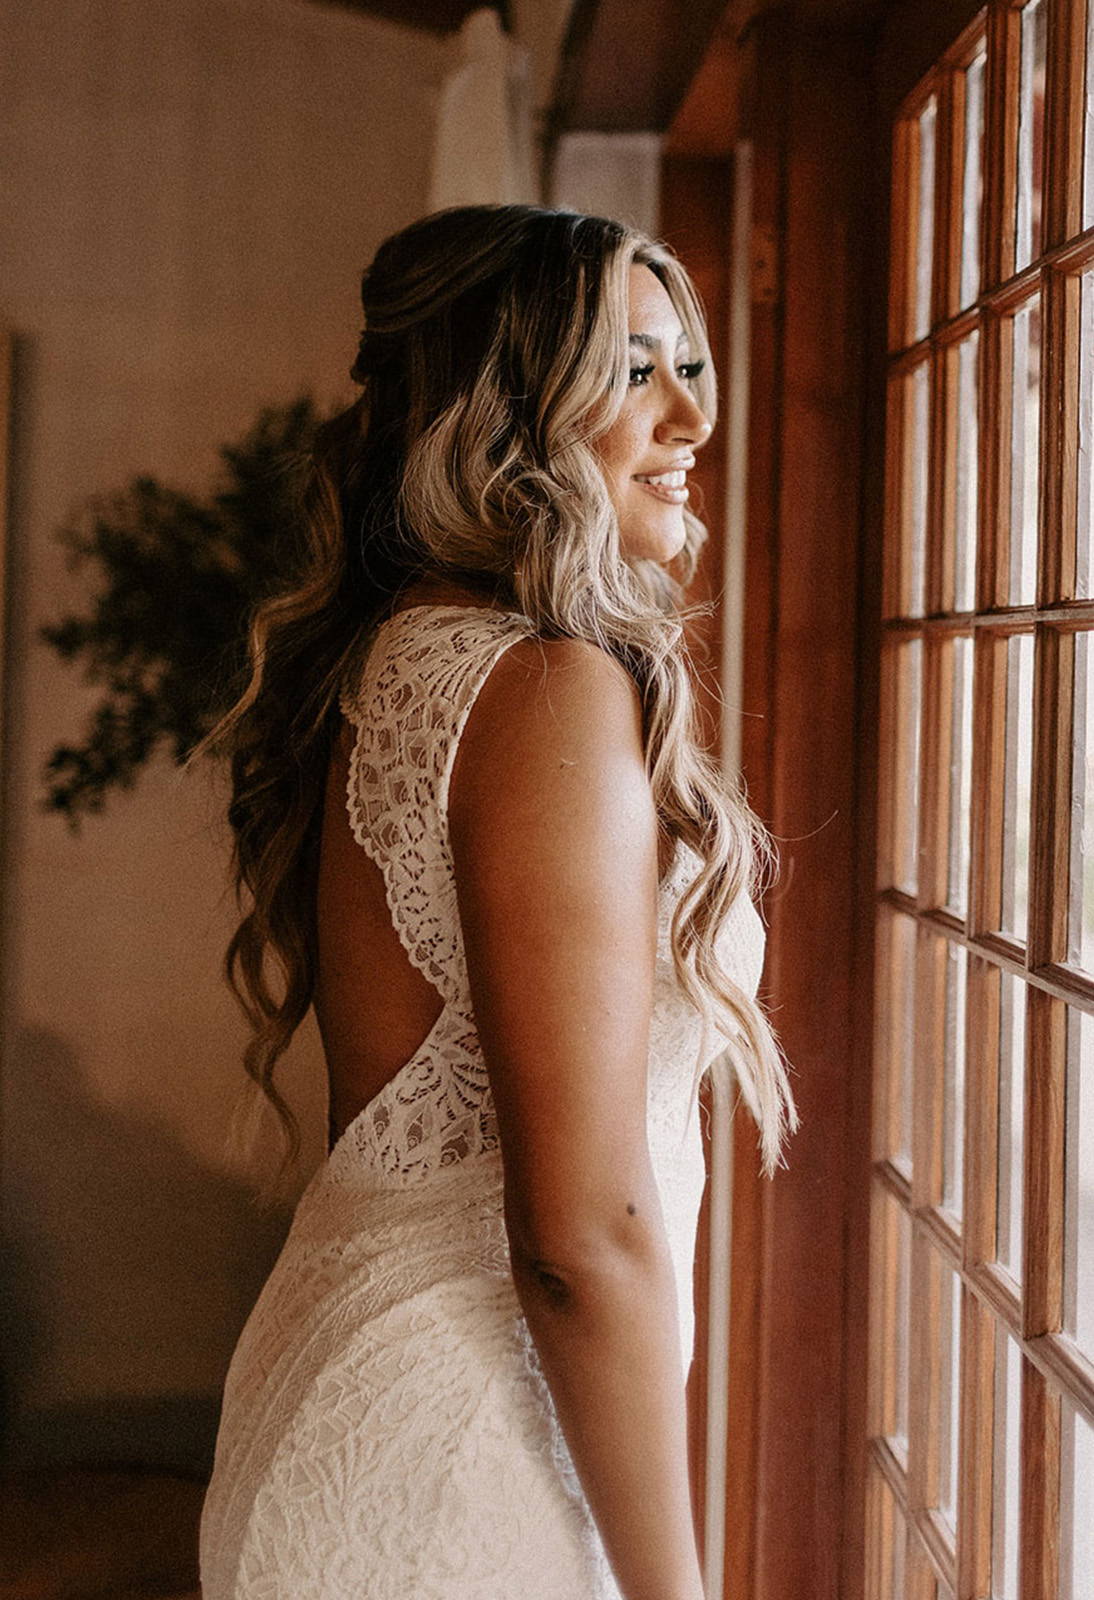 Bride wearing the Chelo gown looking out window